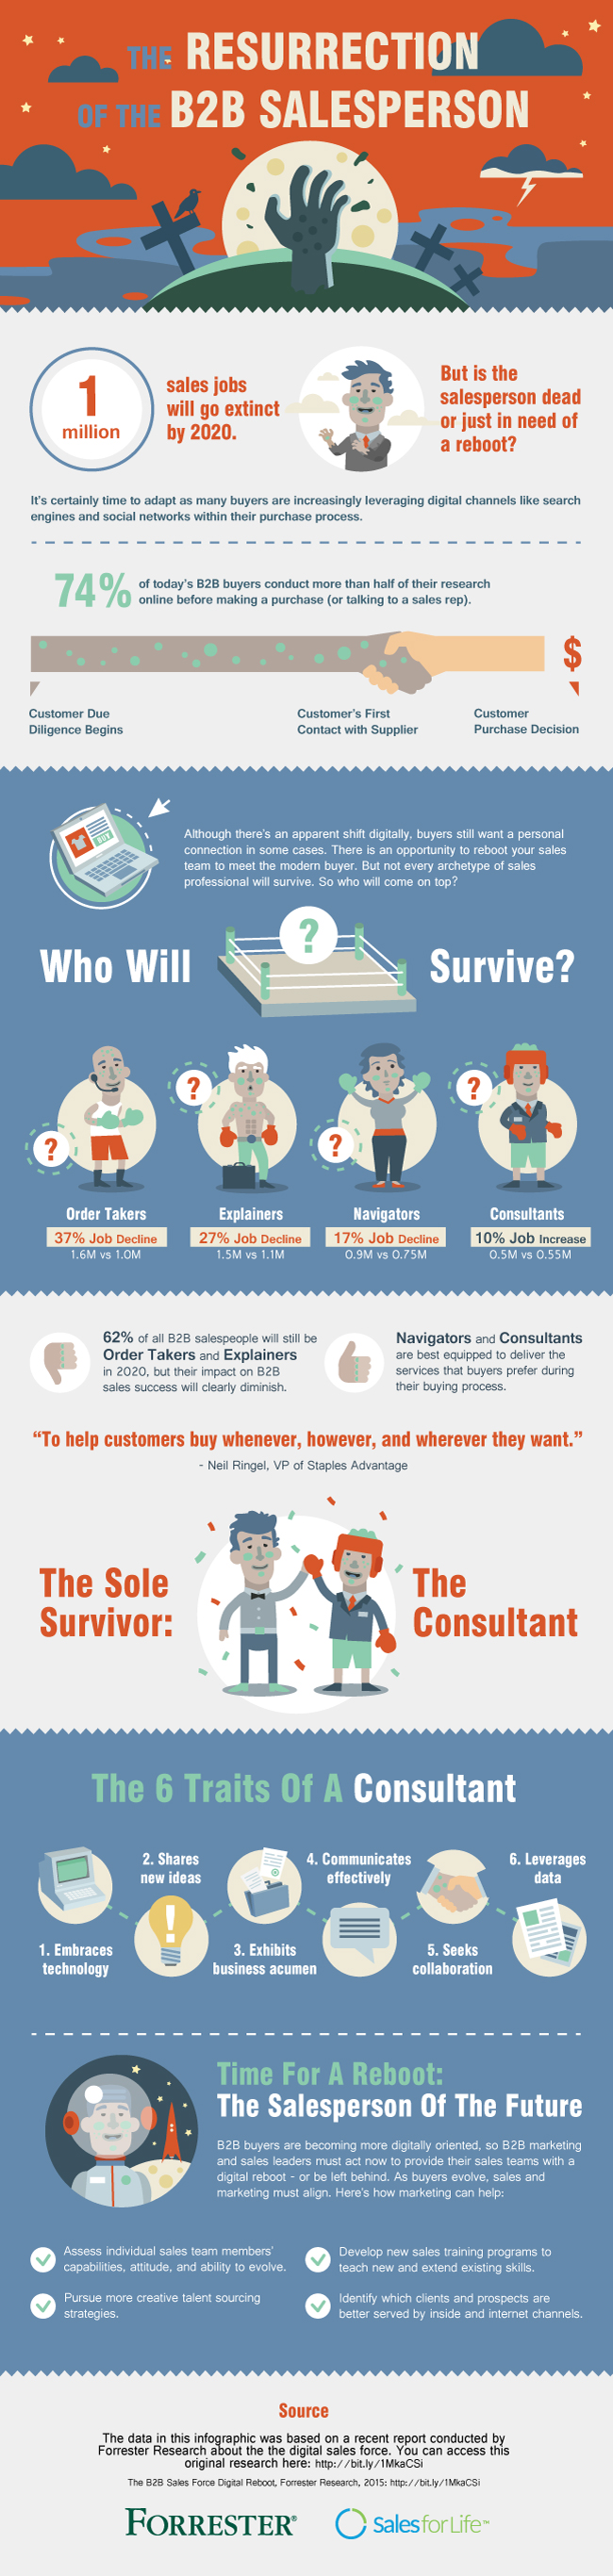 The-Resurrection-Of-The-B2B-Salesperson-Infographic-Forrester